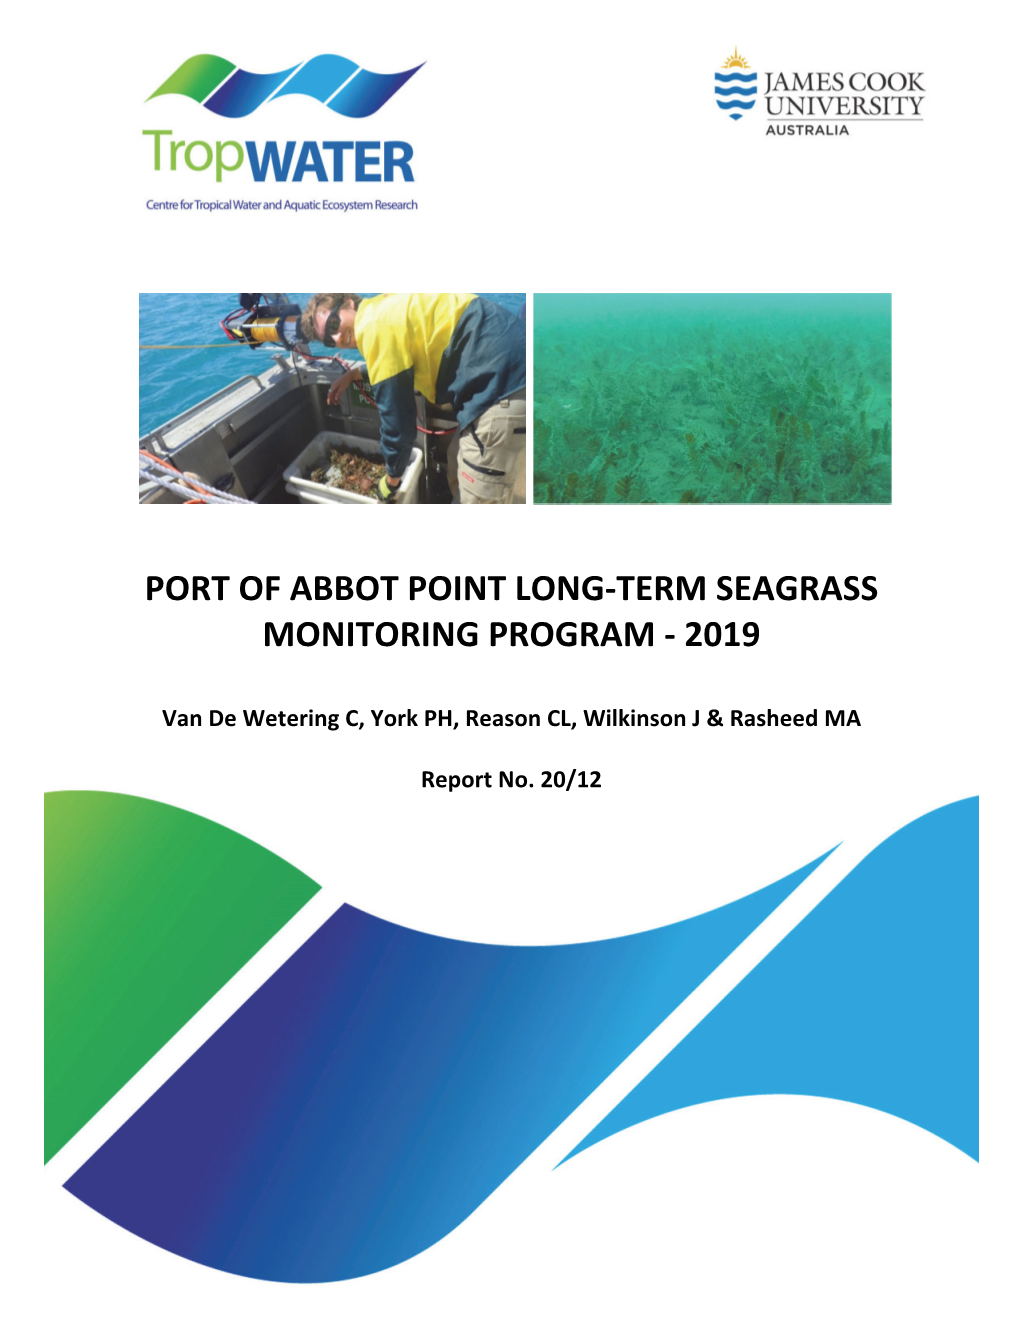 Port of Abbot Point Long-Term Seagrass Monitoring Program - 2019